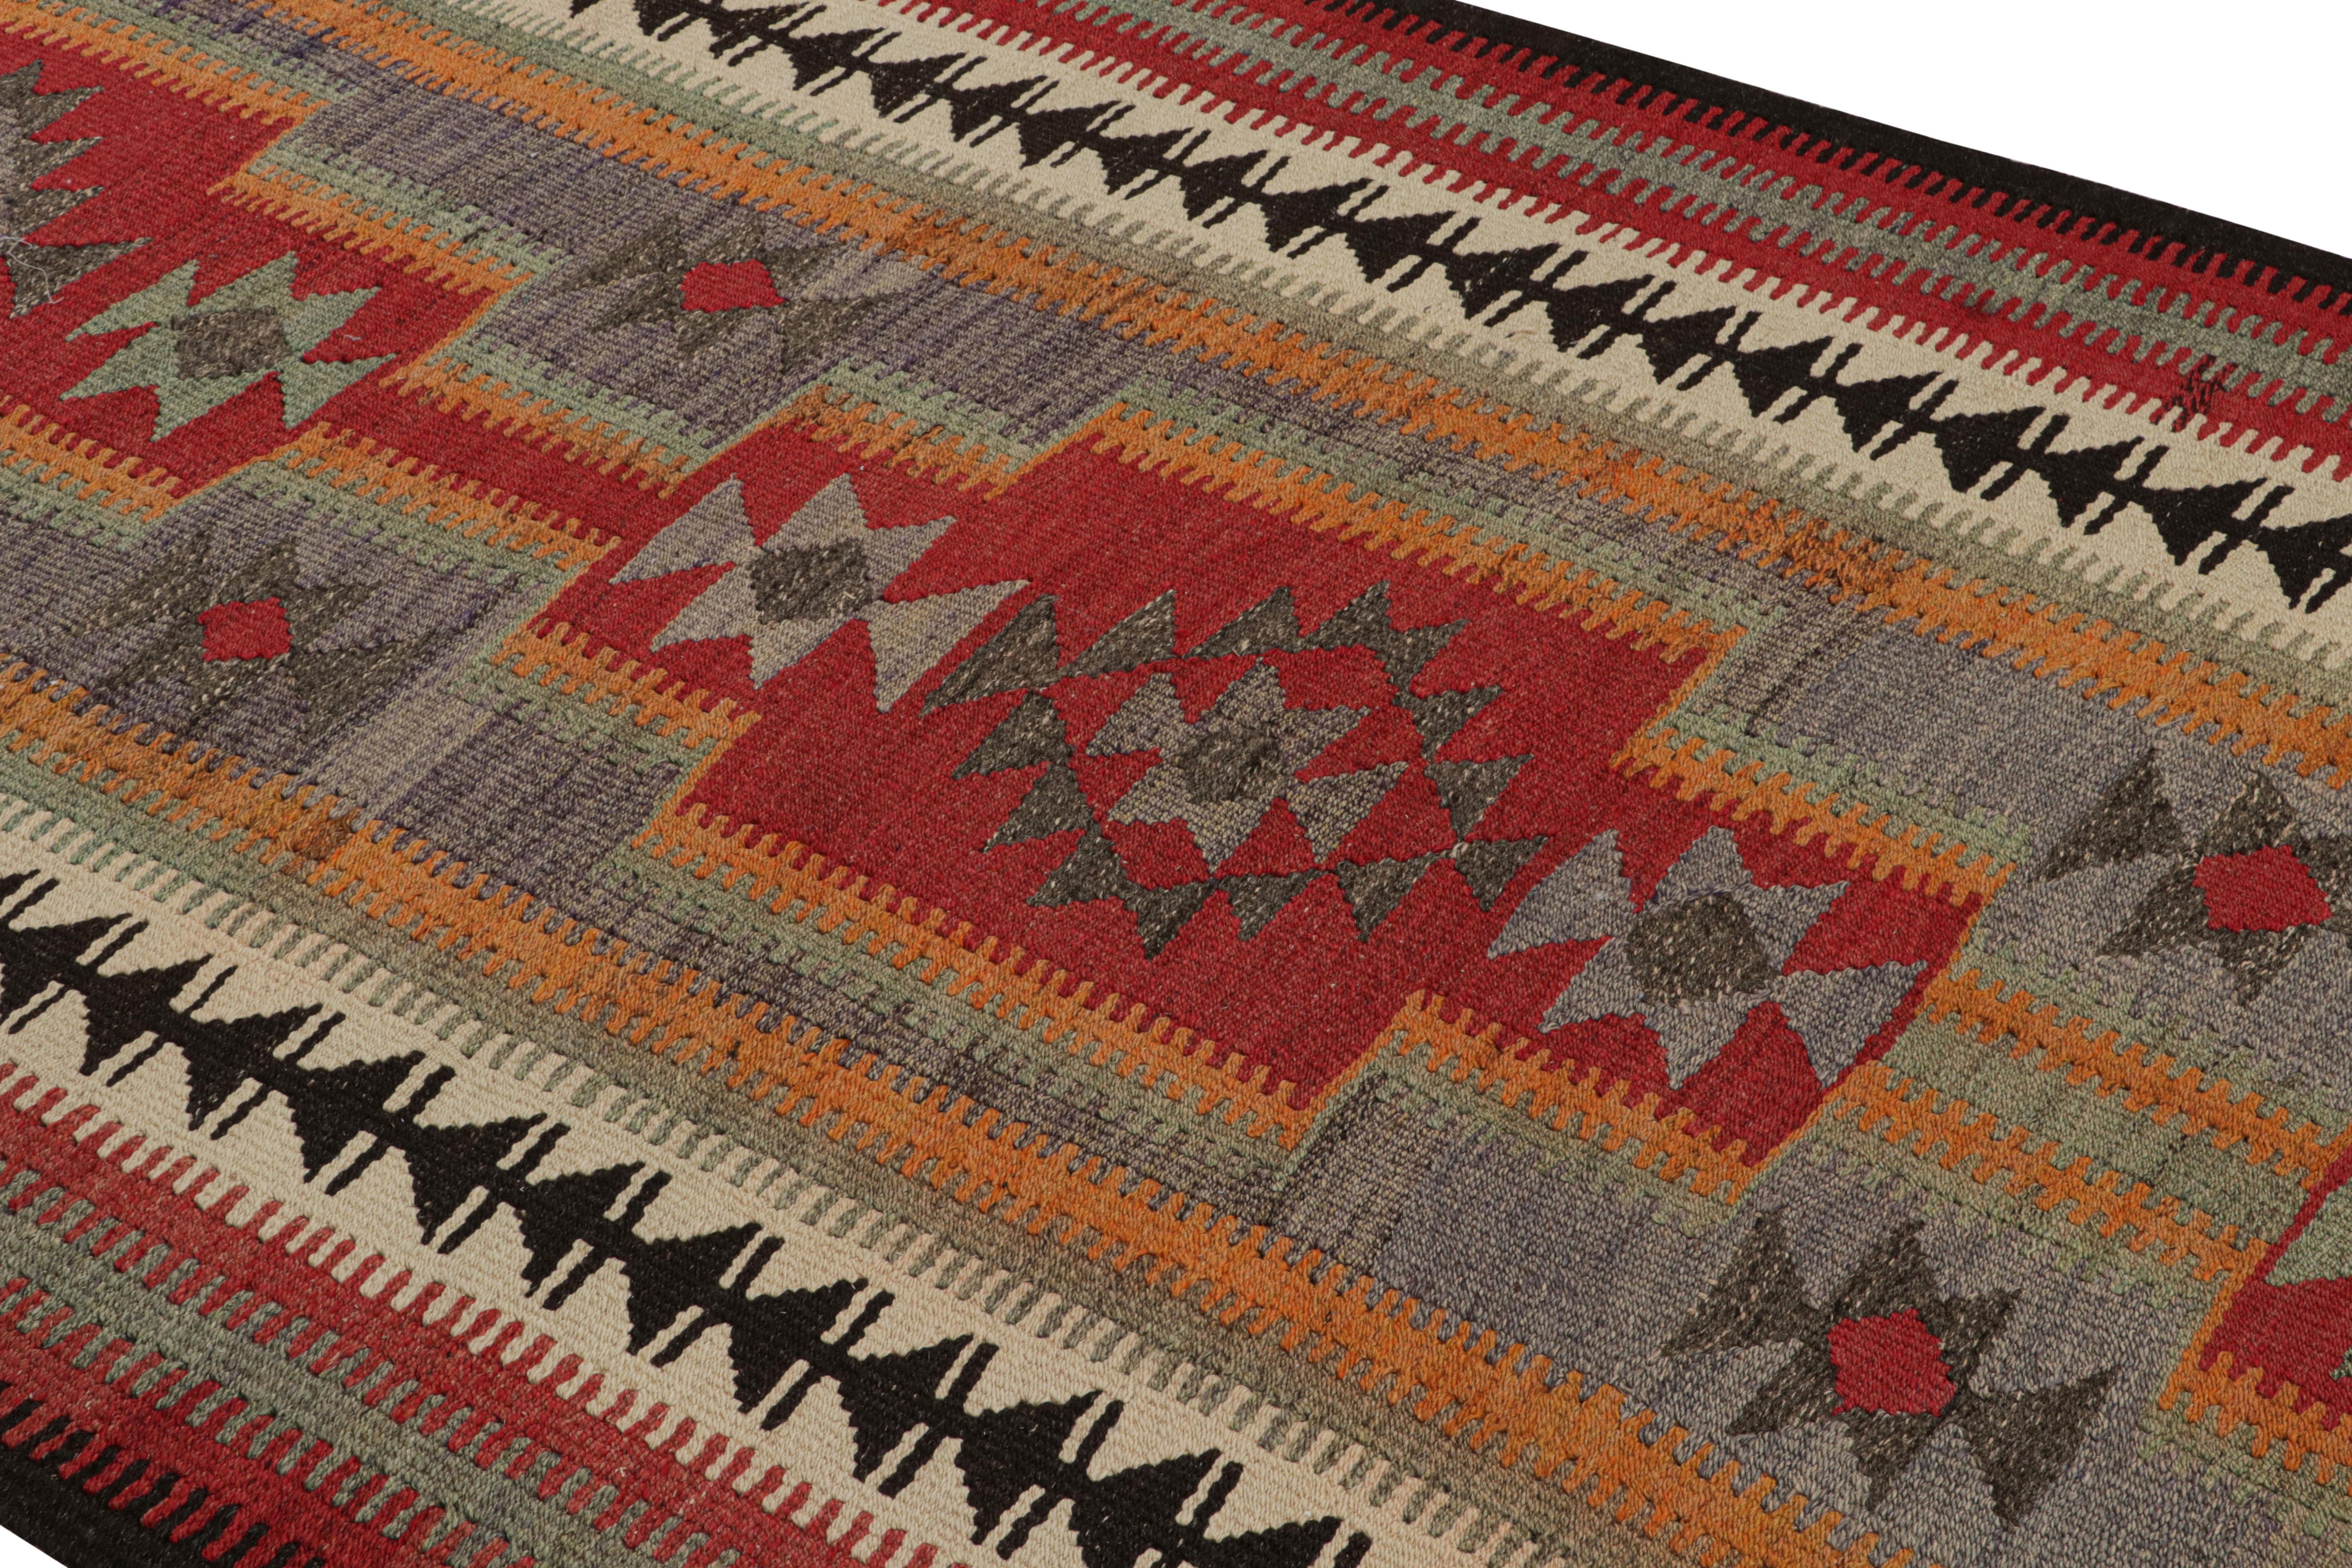 Hailing from Persia circa 1950-1960, a Kurdish kilim rug among the newest unveilings from our tribal flat weave curations. 

On the Design: Connoisseurs will observe a well defined geometric pattern in red, blue, yellow, black & white flawlessly